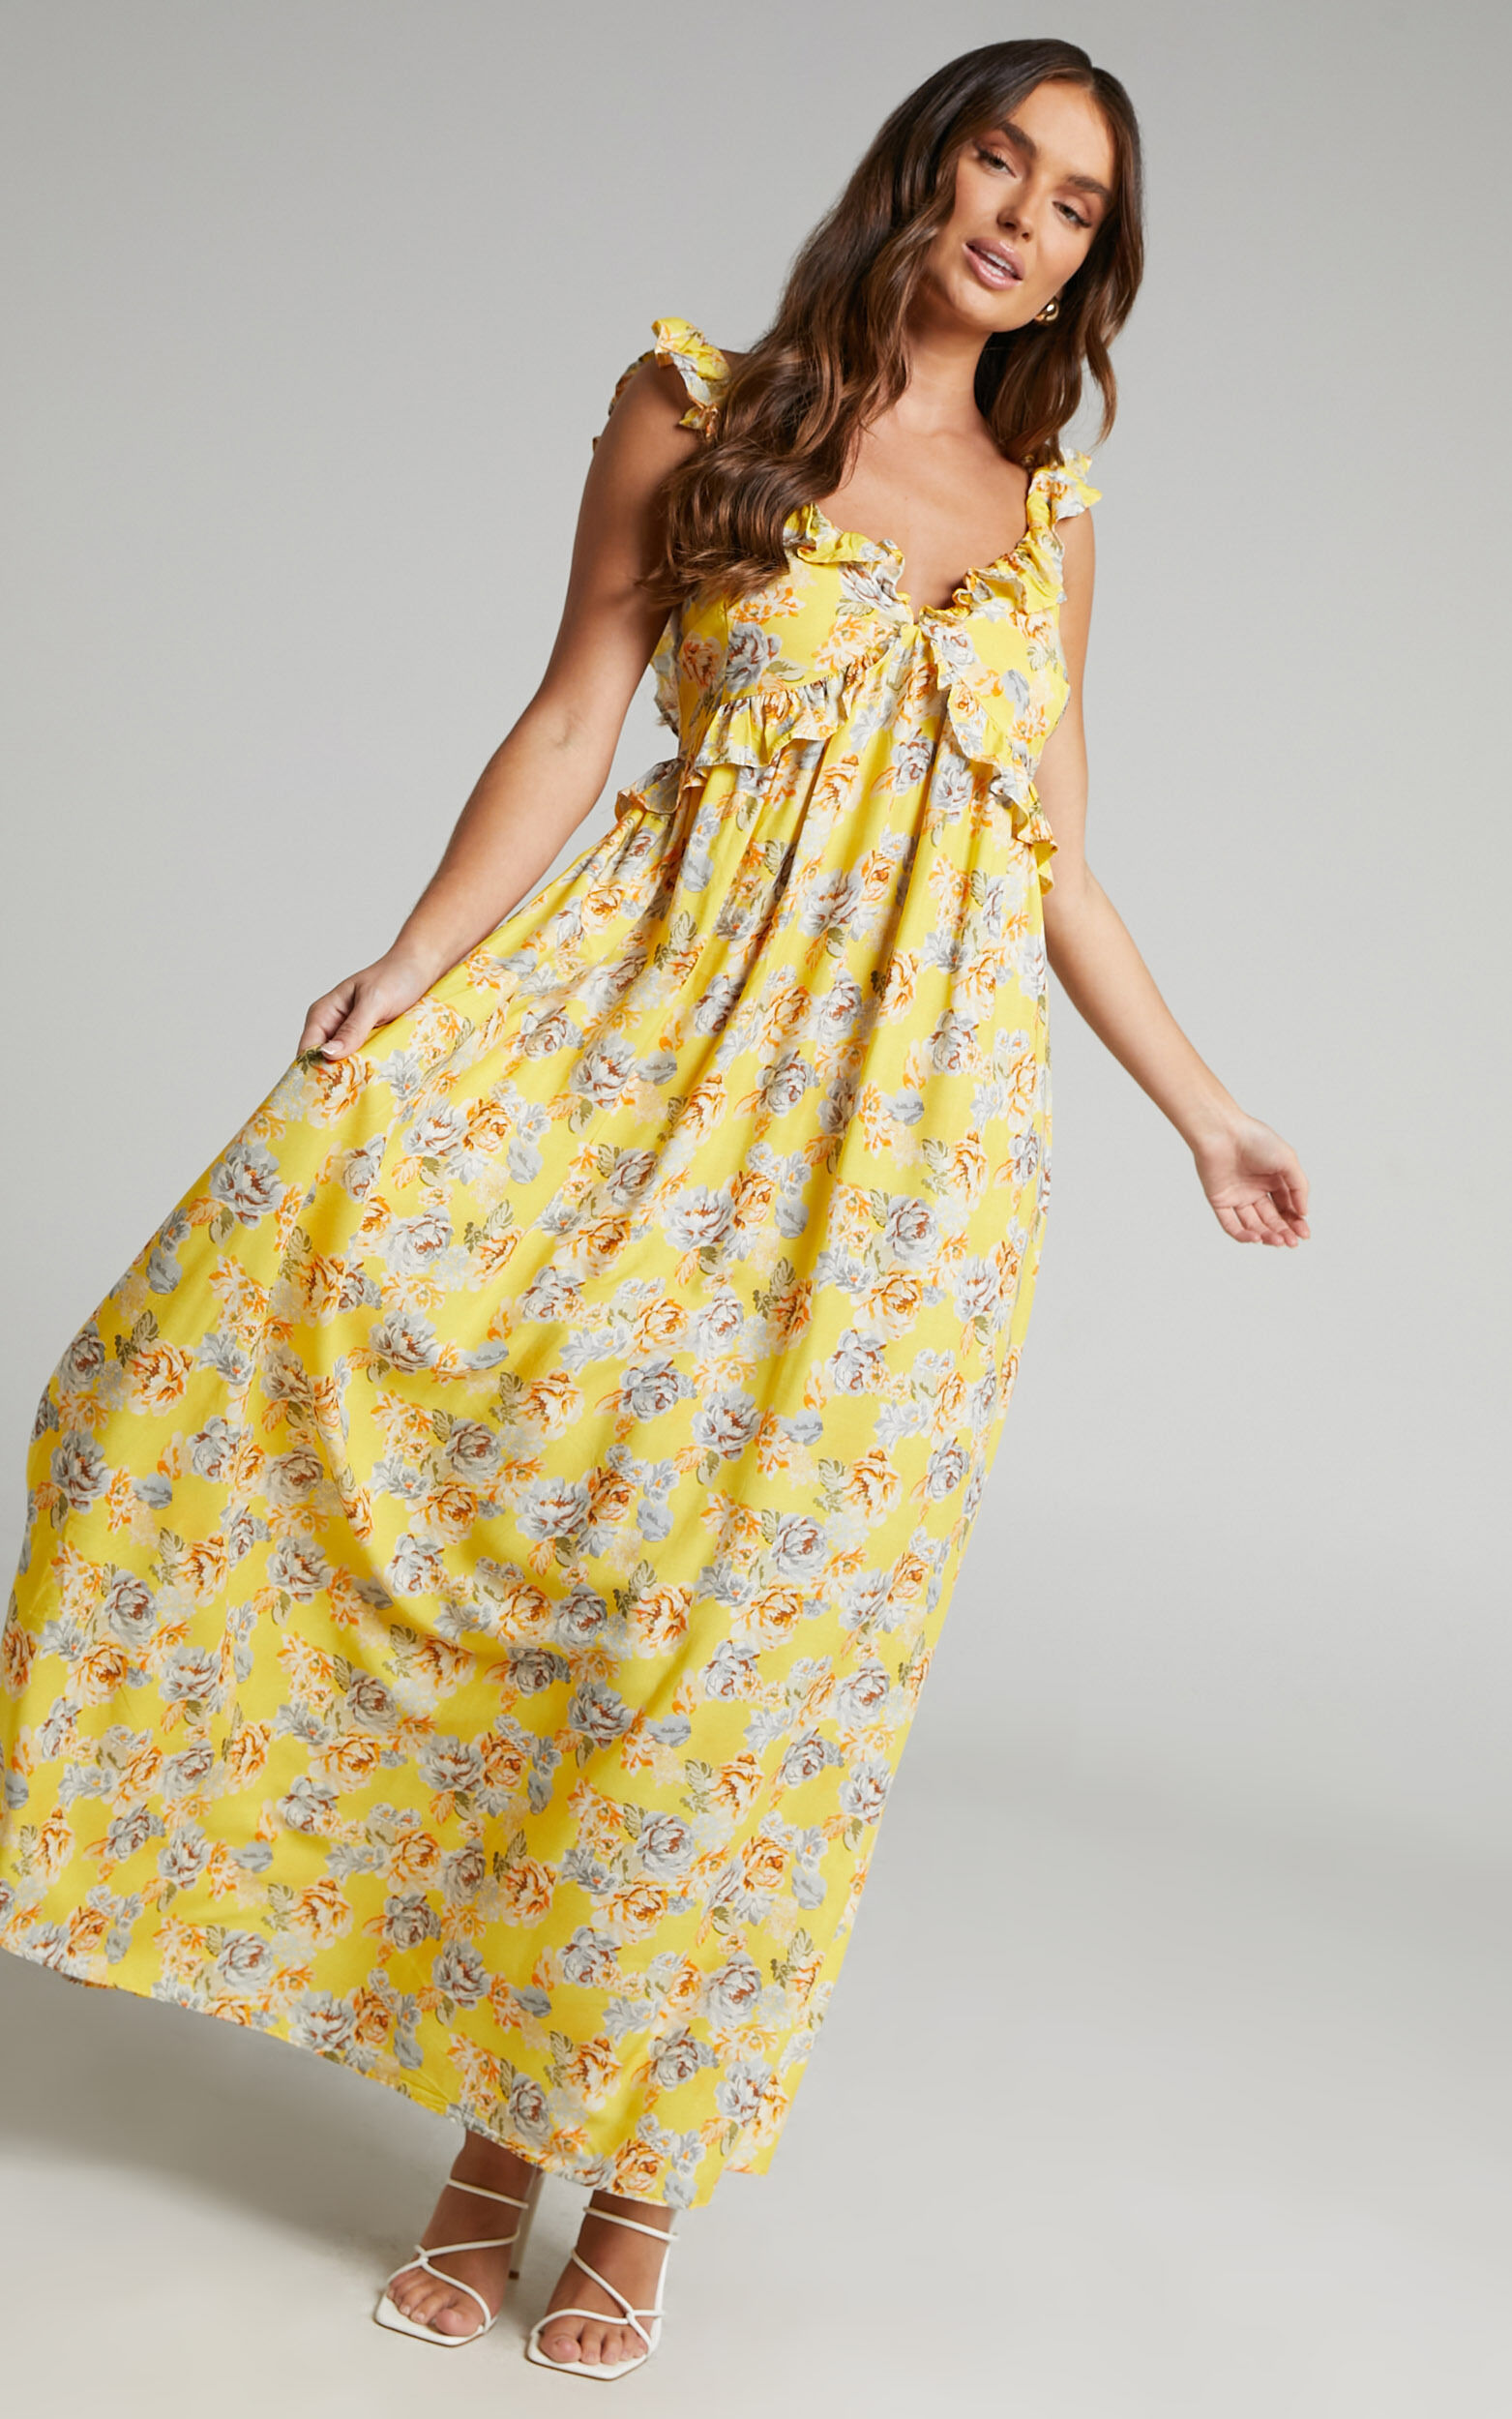 Serenyo Midaxi Dress - Ruffle Detail Low Back Dress in Yellow Floral - 06, YEL1